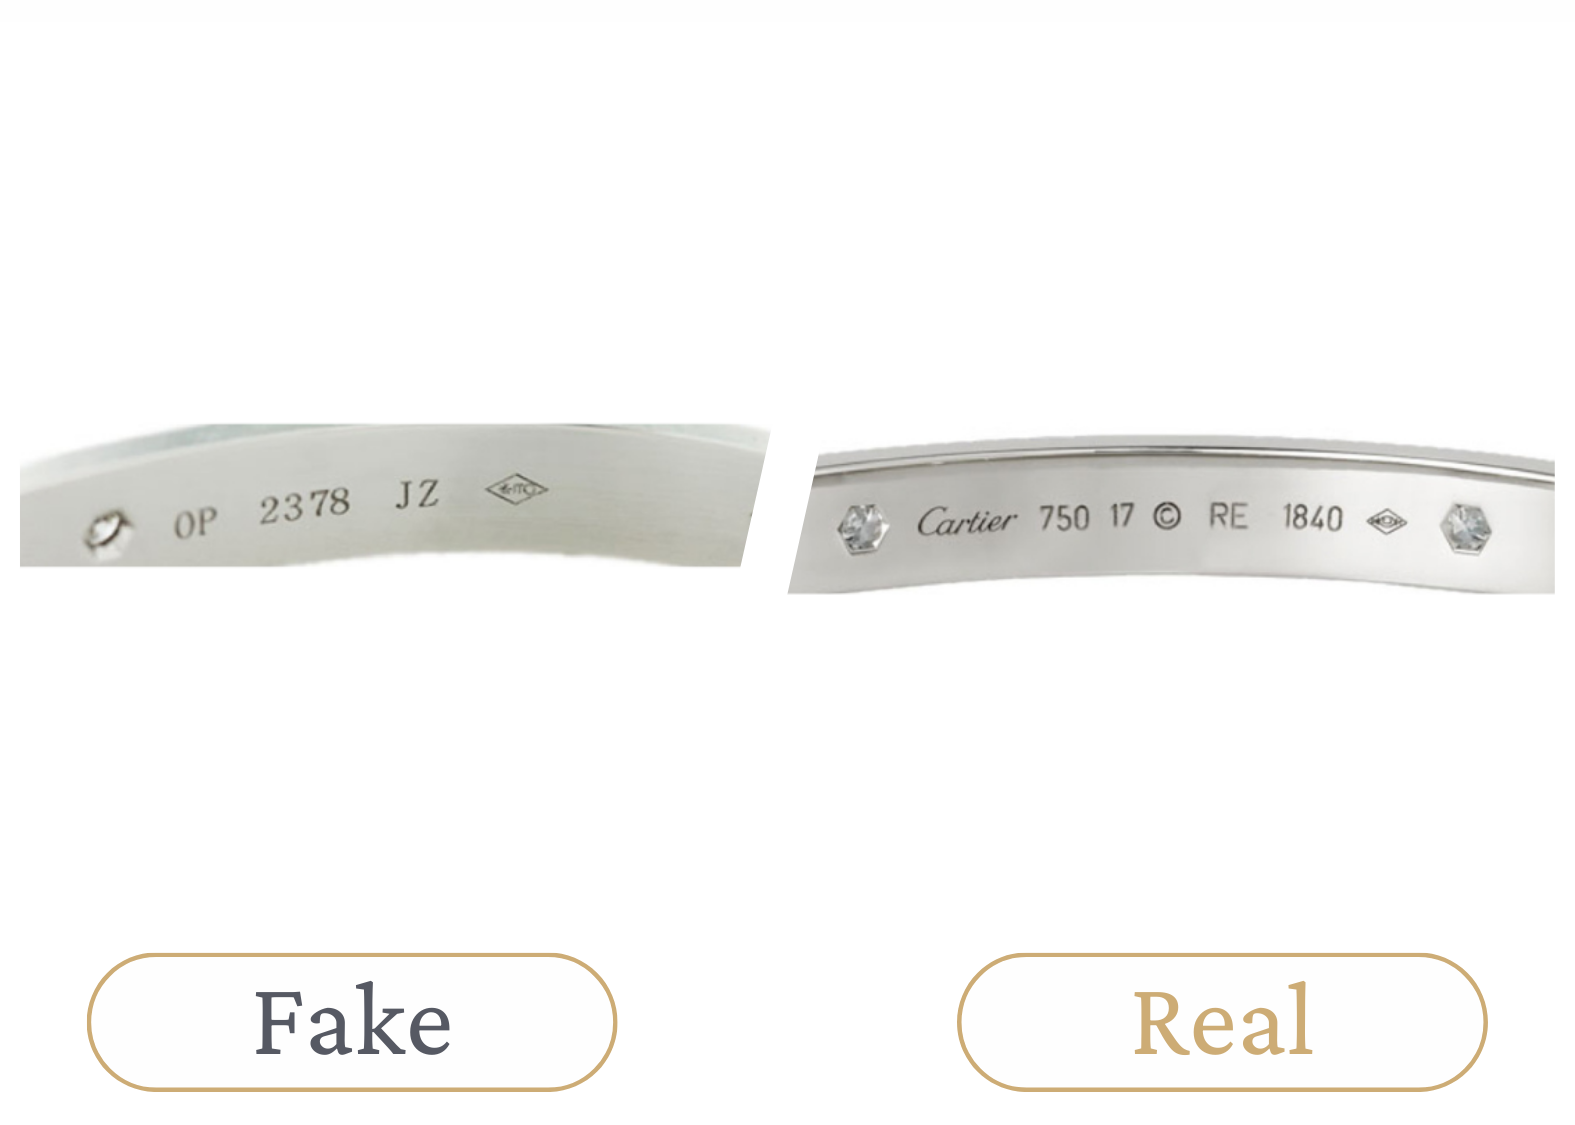 How To Spot A Fake Cartier Love Bracelet? - Fake vs real 3